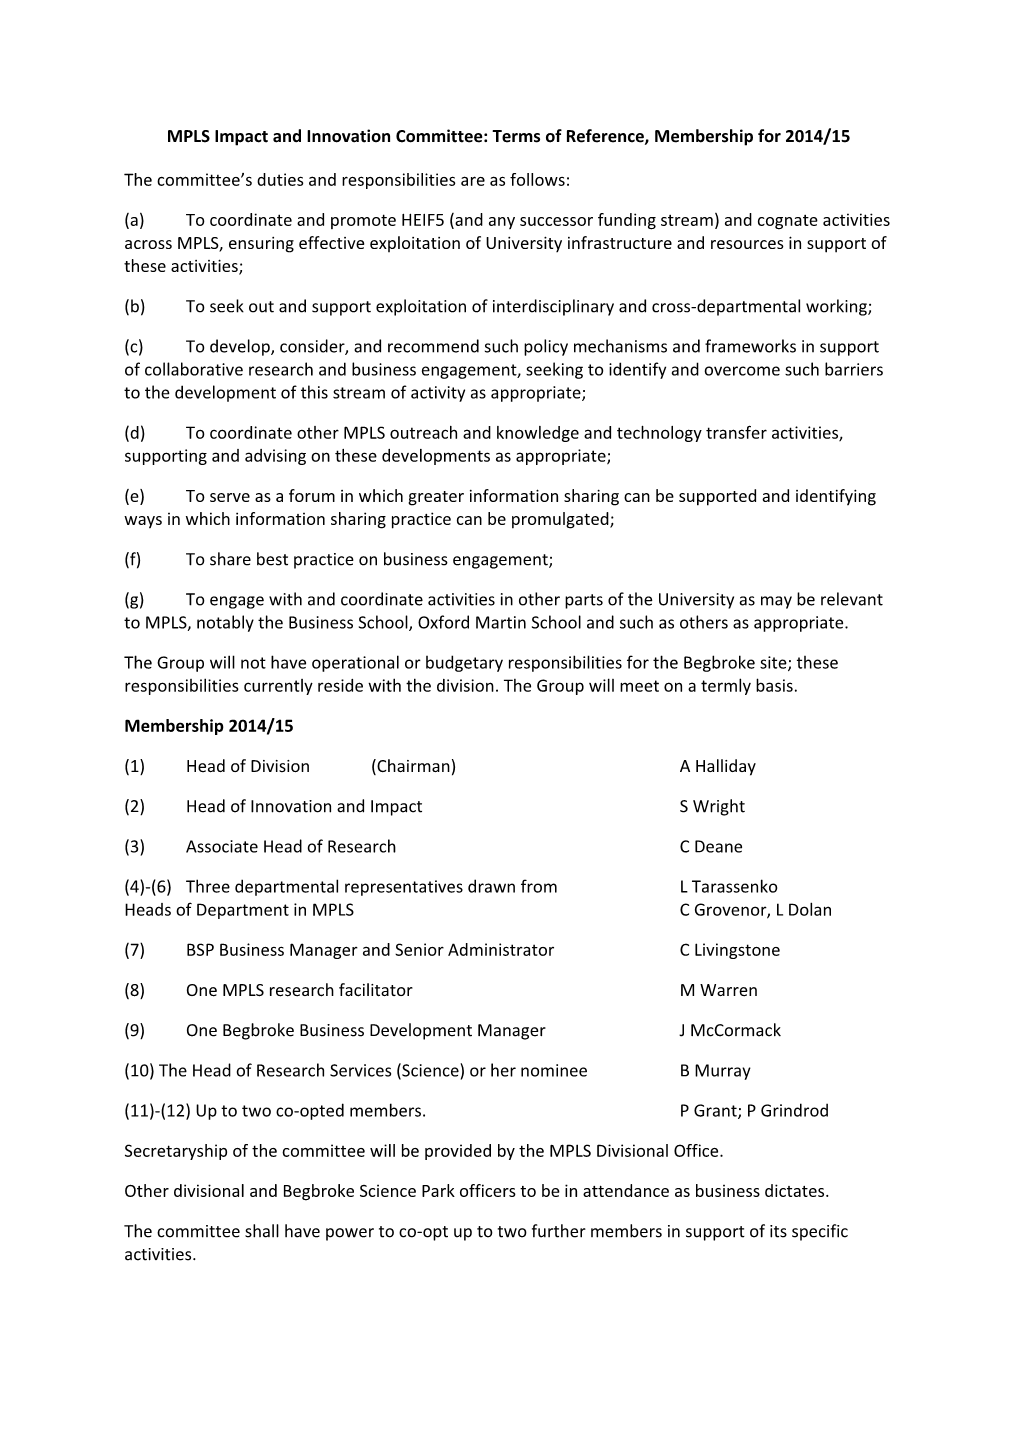 MPLS Impact and Innovation Committee: Terms of Reference, Membership for 2014/15